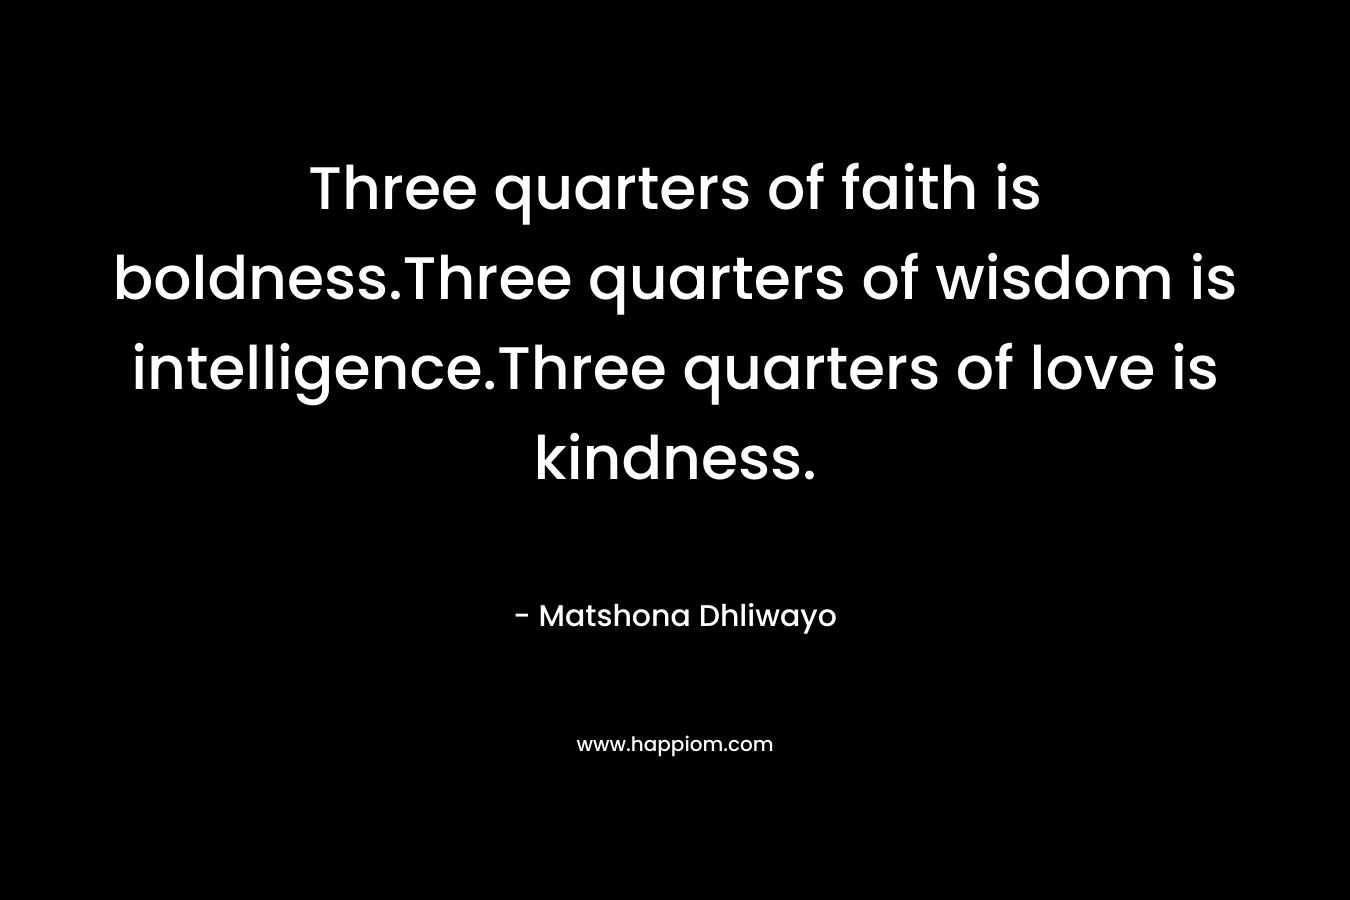 Three quarters of faith is boldness.Three quarters of wisdom is intelligence.Three quarters of love is kindness.